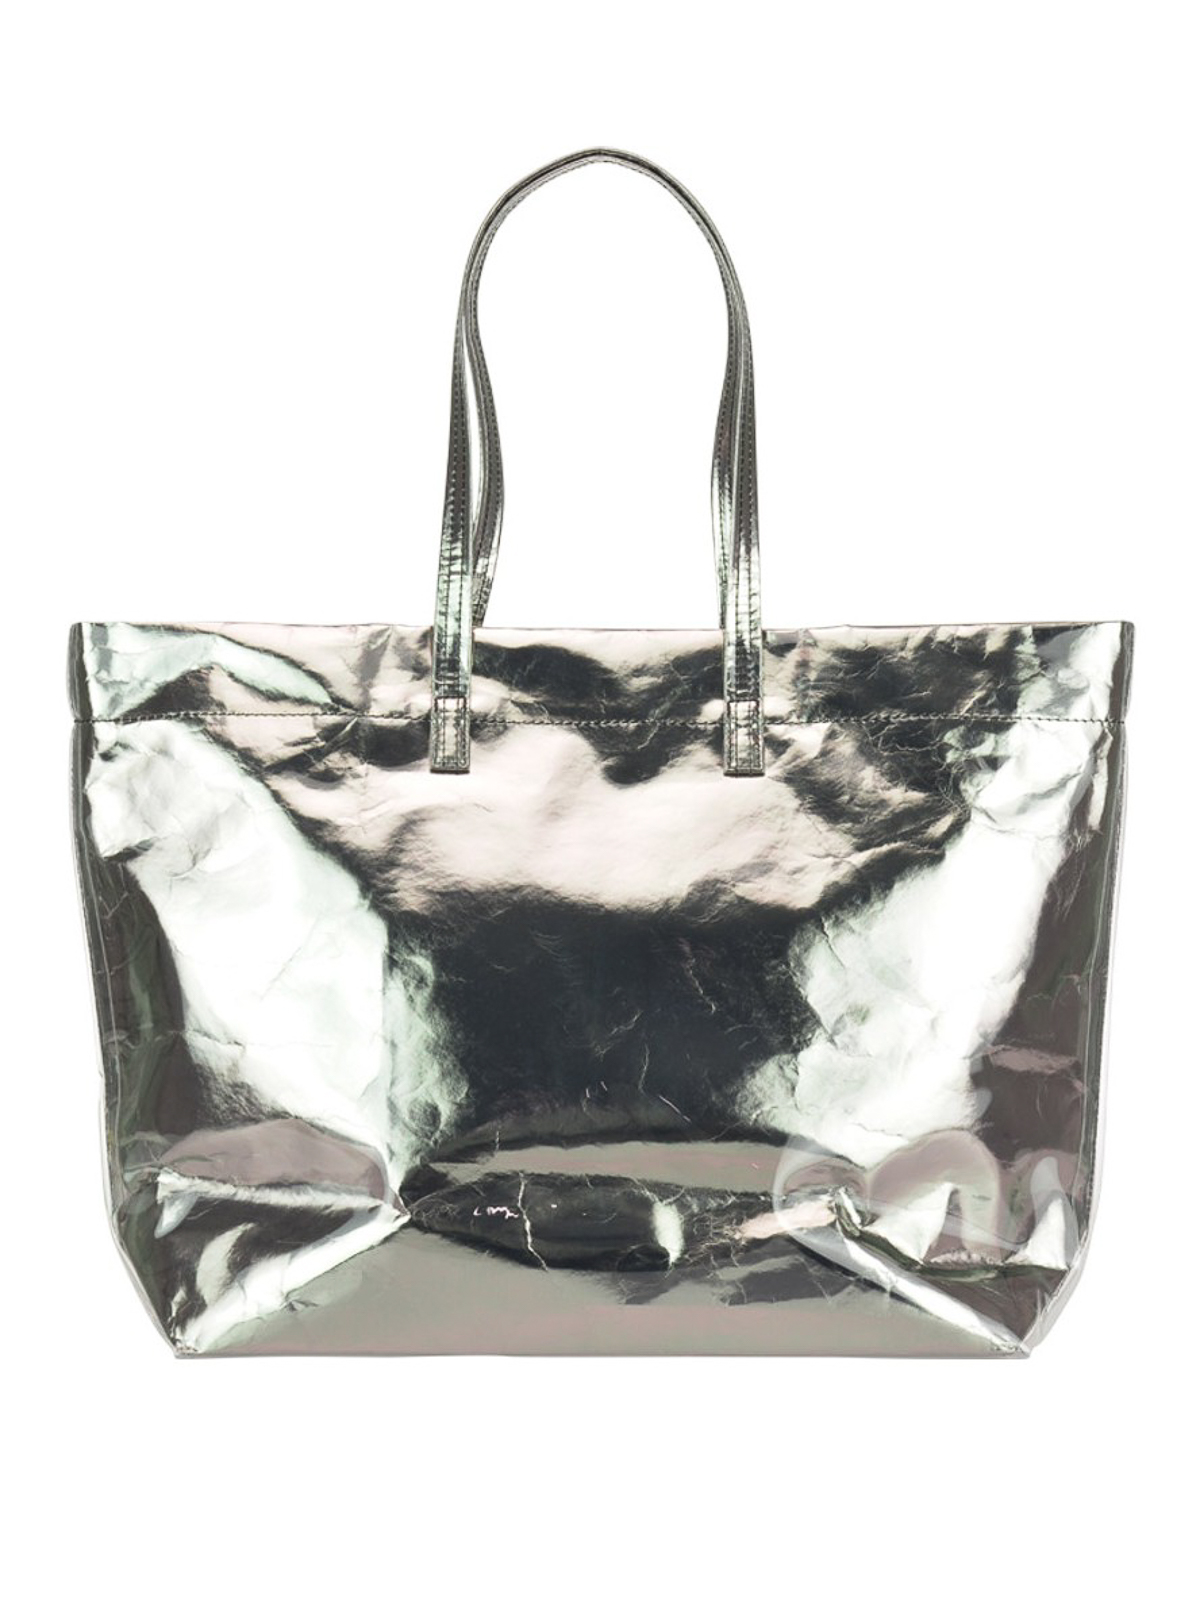 Totes bags Marc Jacobs - The Foil silver tech fabric tote bag - M0014874040